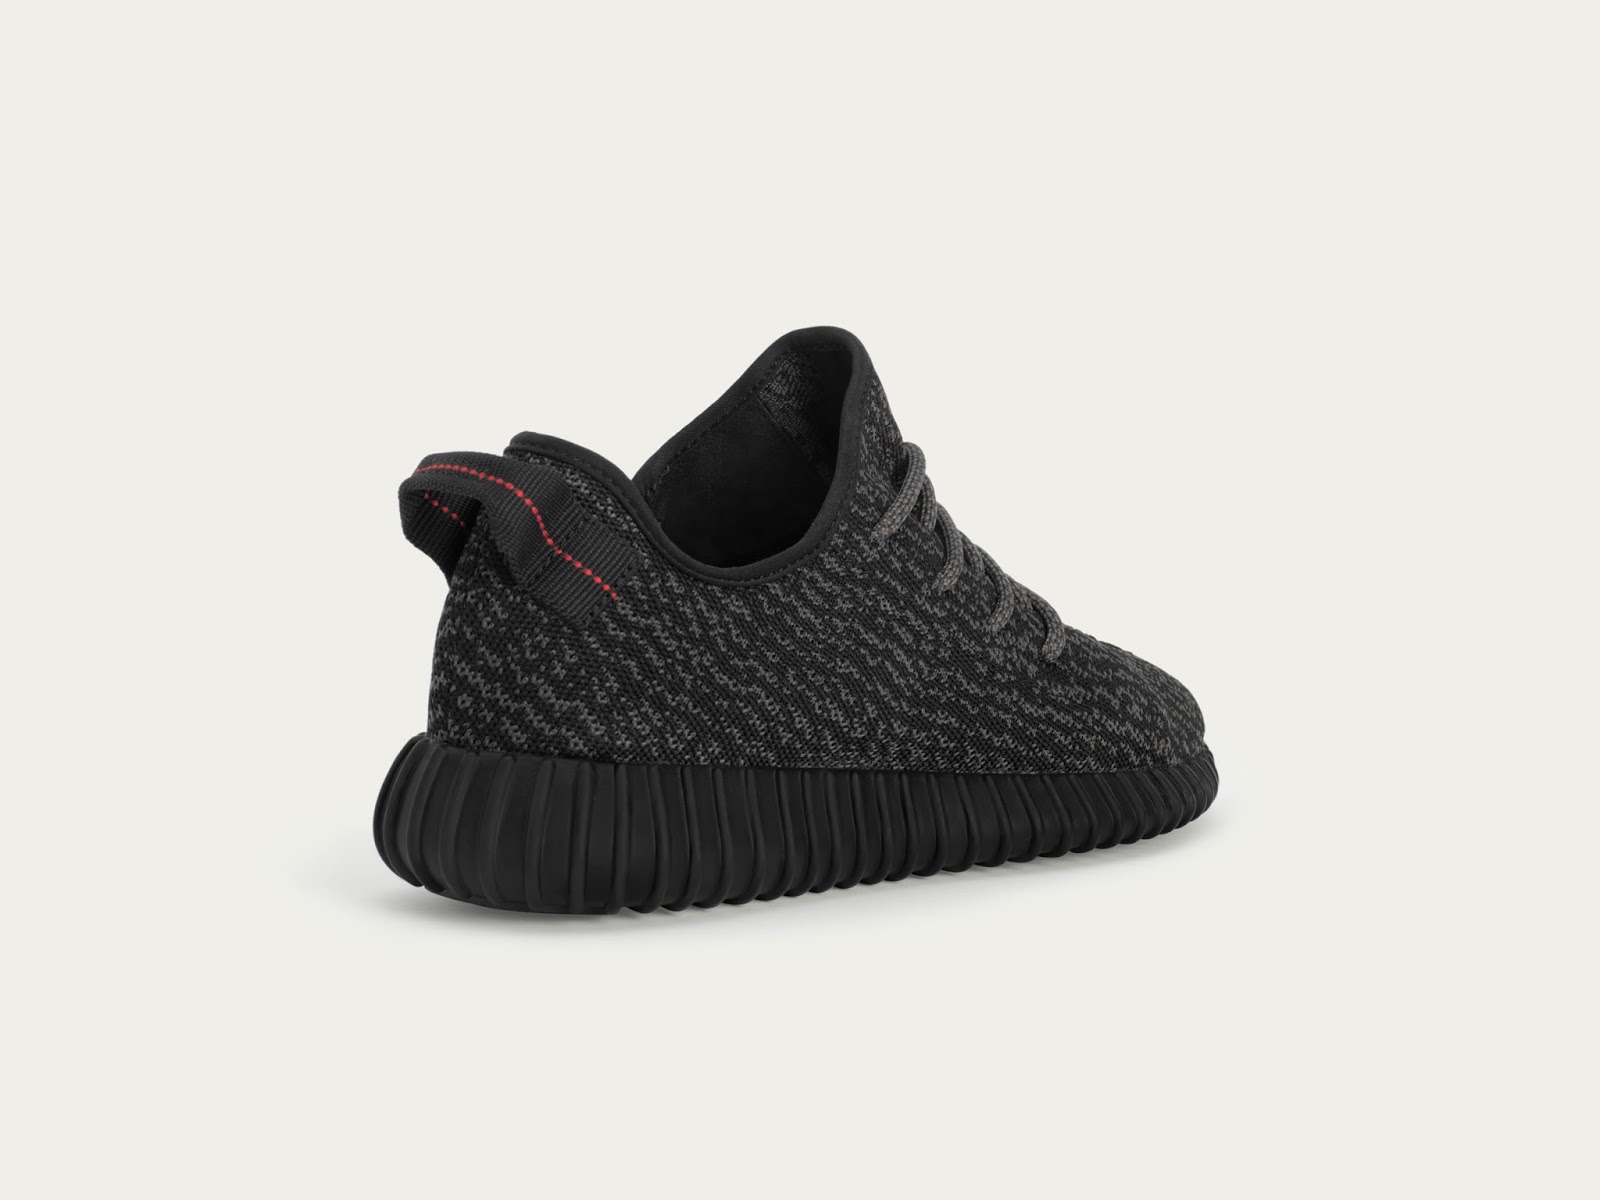 yeezy boost 350 v2 price south africa